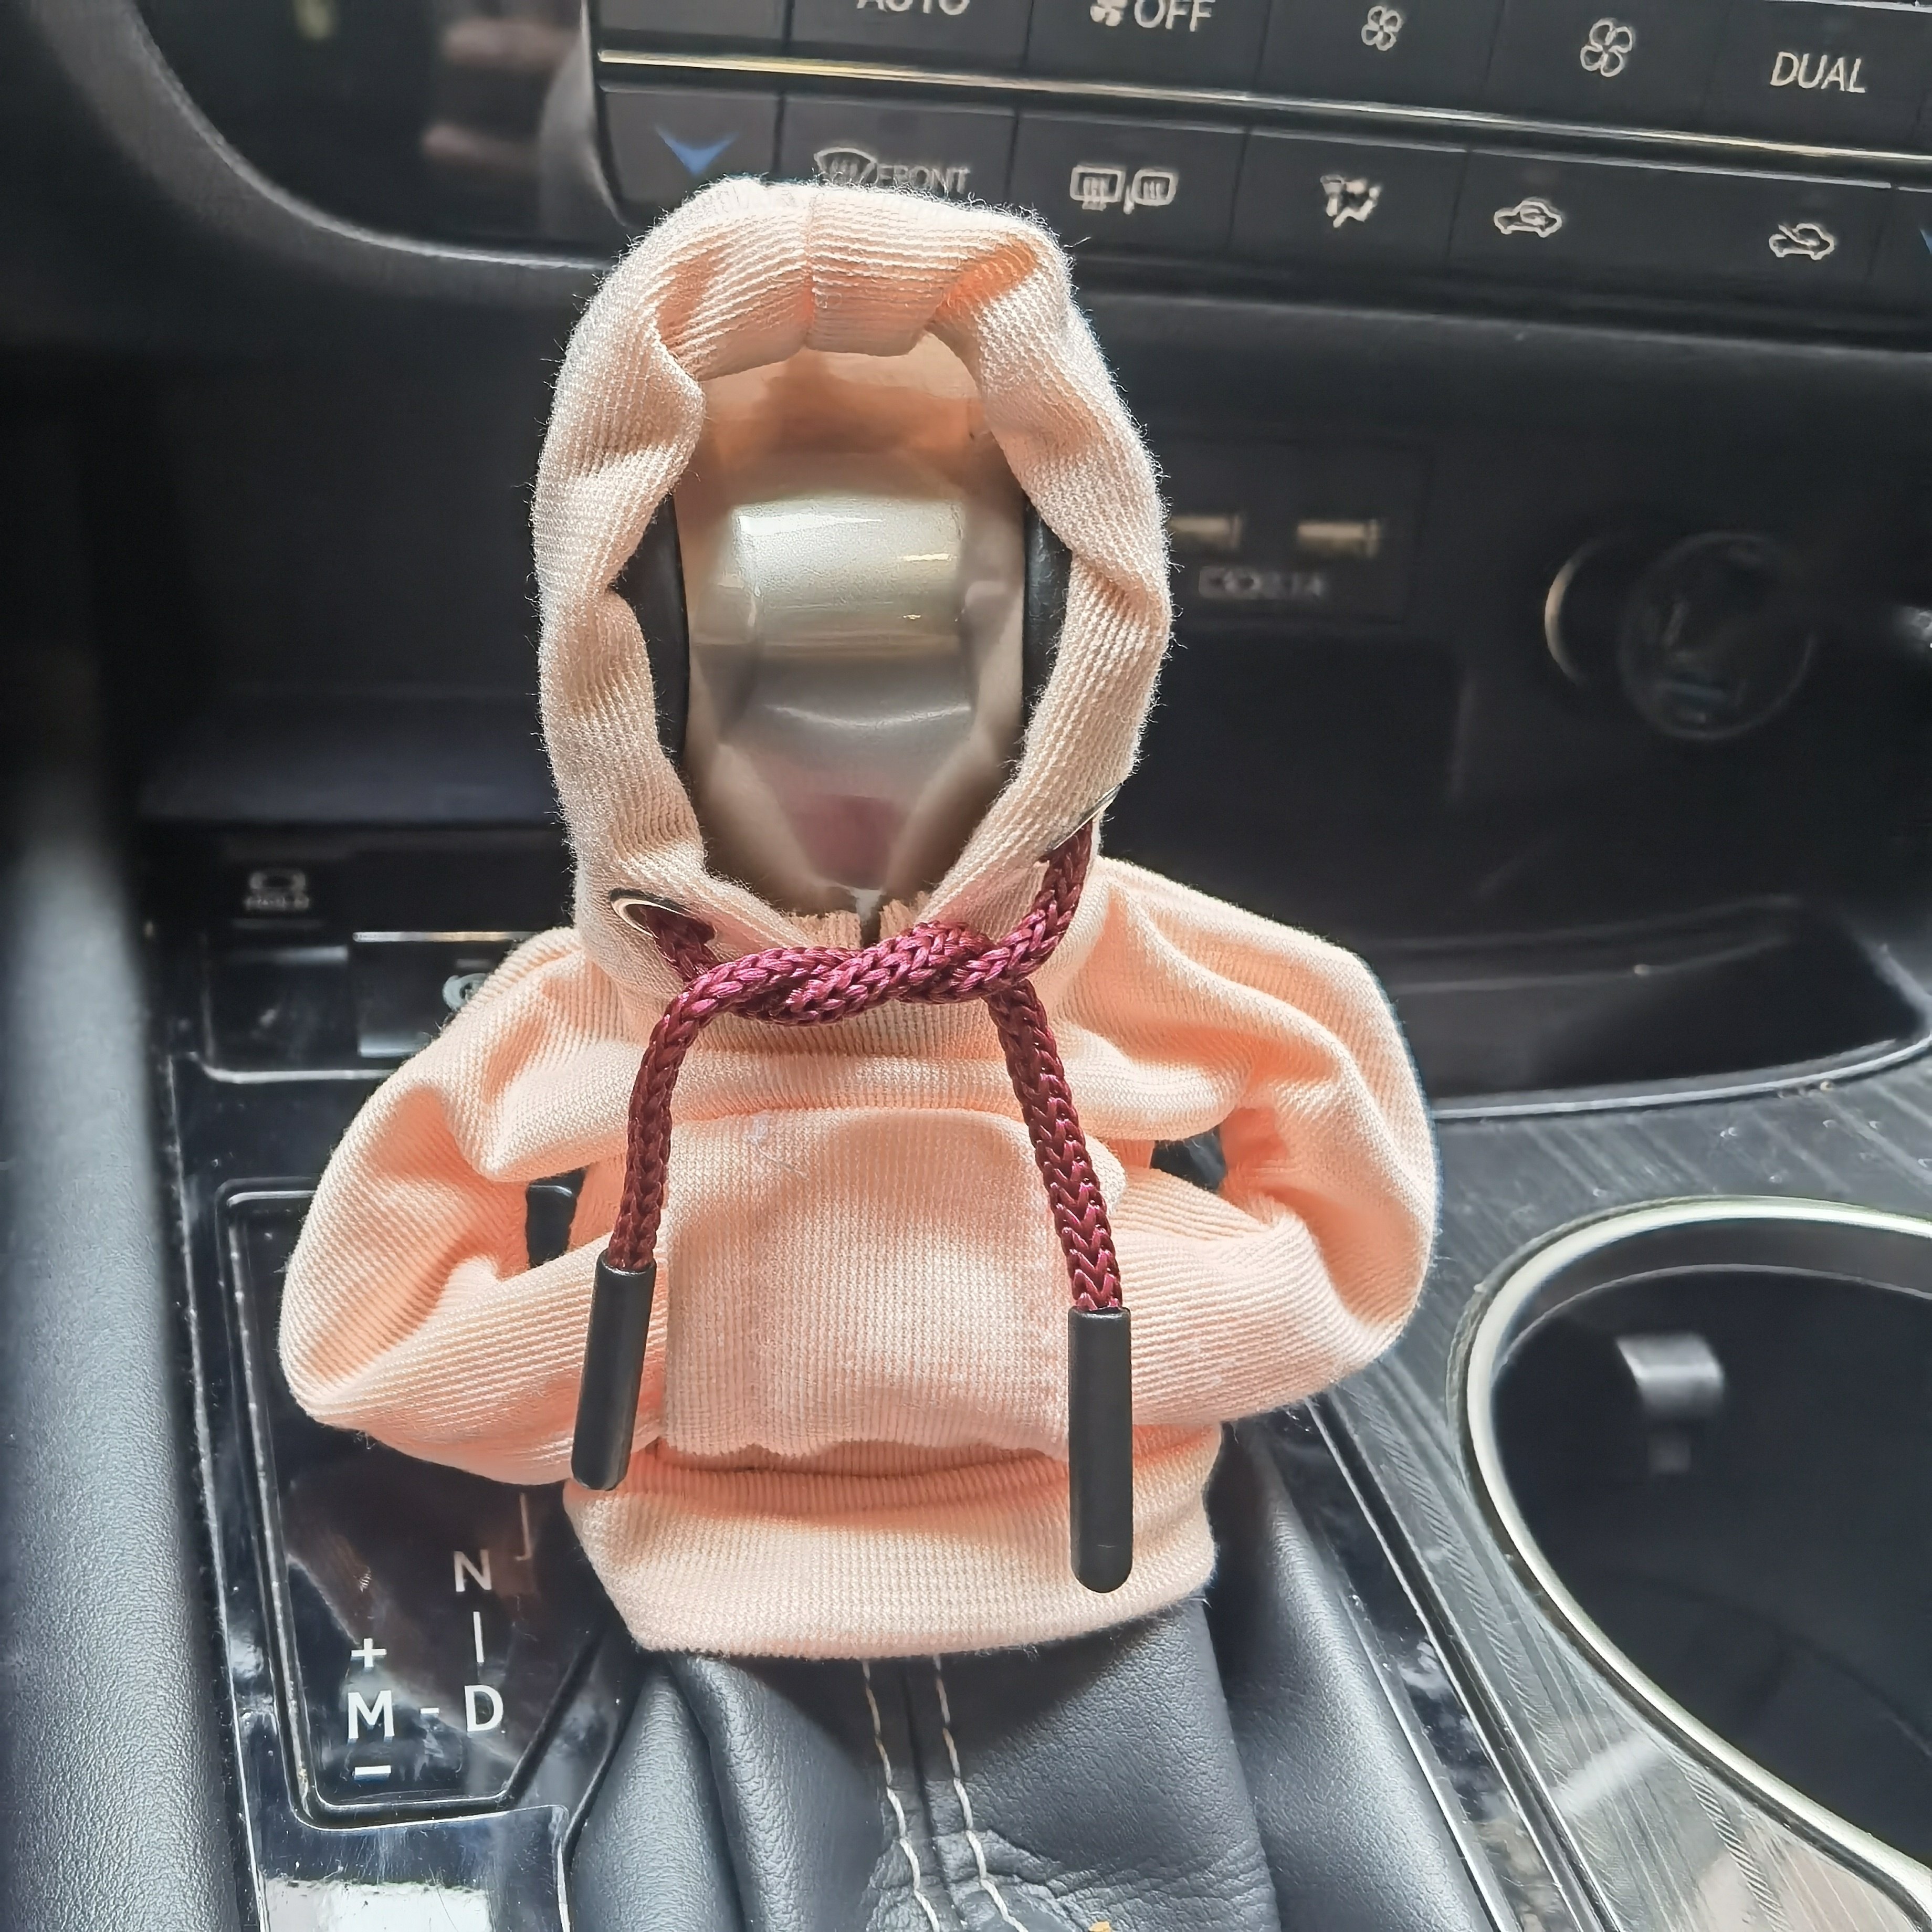 Universal Auto Gear Shift Hoodie Cover Stylish Handle Decoration For Manual  And Universal Car Shift Stick Automatic Interior From Skywhite, $2.71